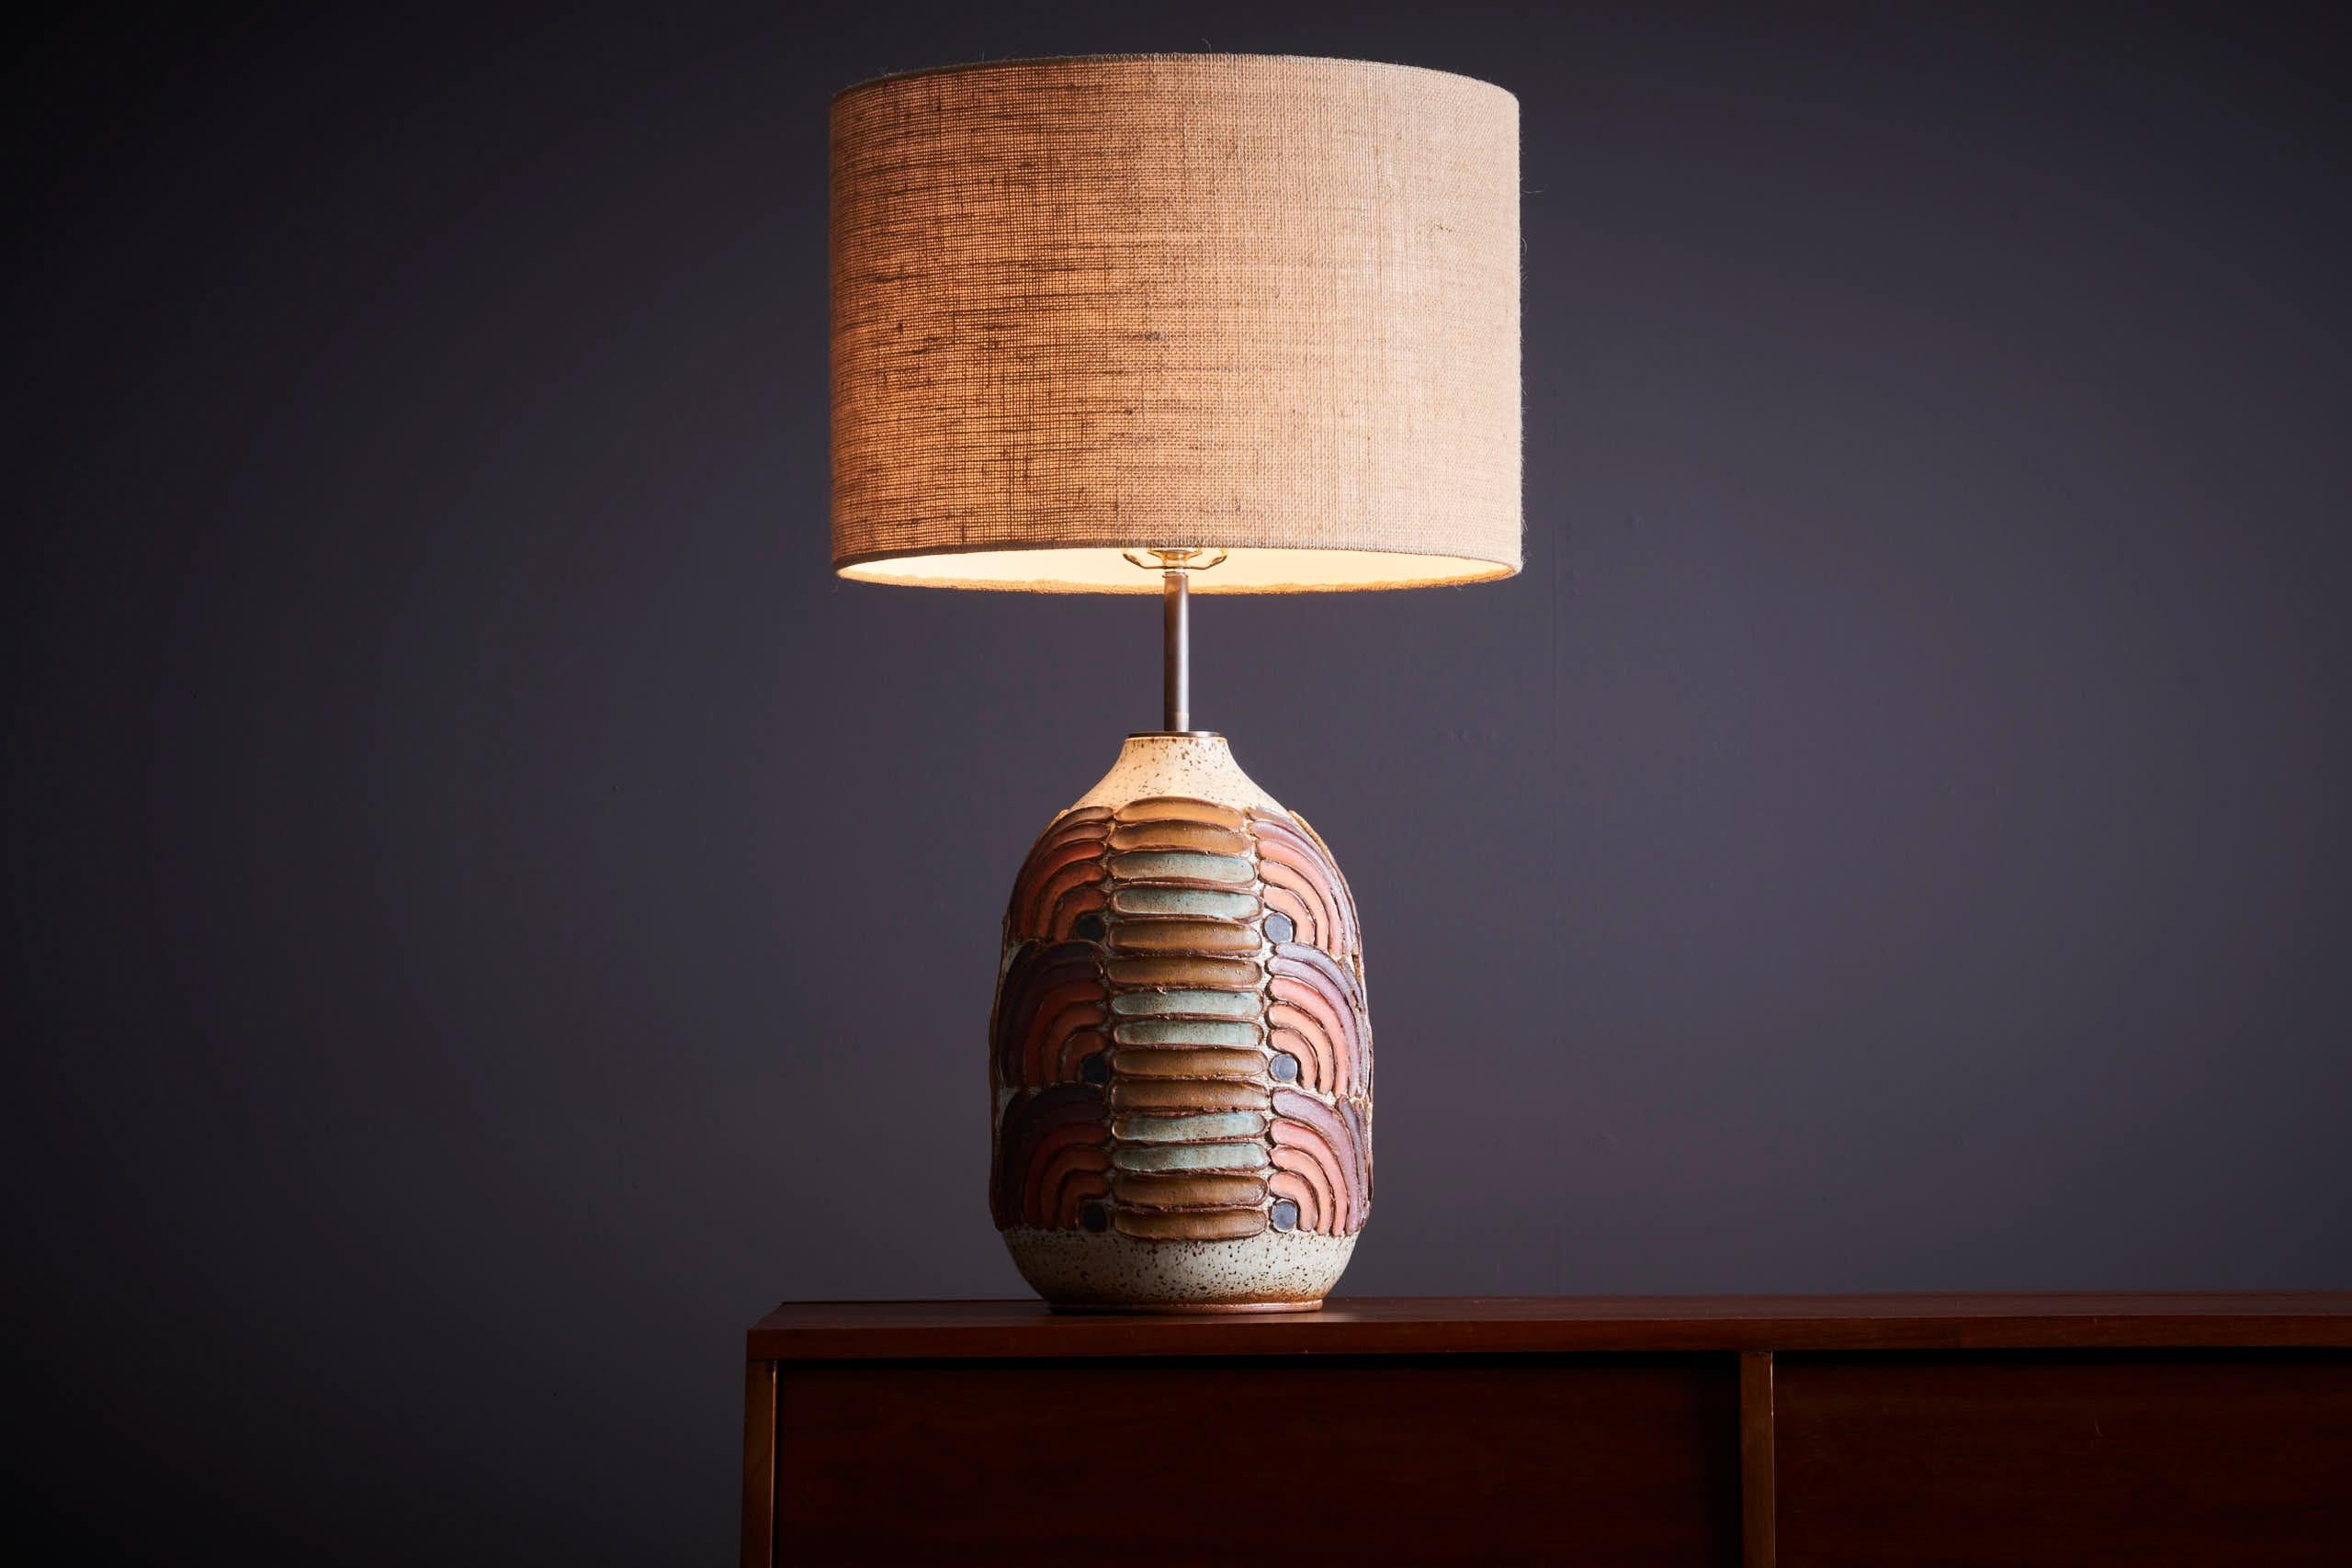 Kat & Roger Table Lamp with hand-crafted and hand-painted ceramic base, USA. Measurements given apply to the base of the lamp. 

Nestled amidst the serene landscapes of Southern California, ceramic artists Kat Hutter and Roger Lee have been quietly